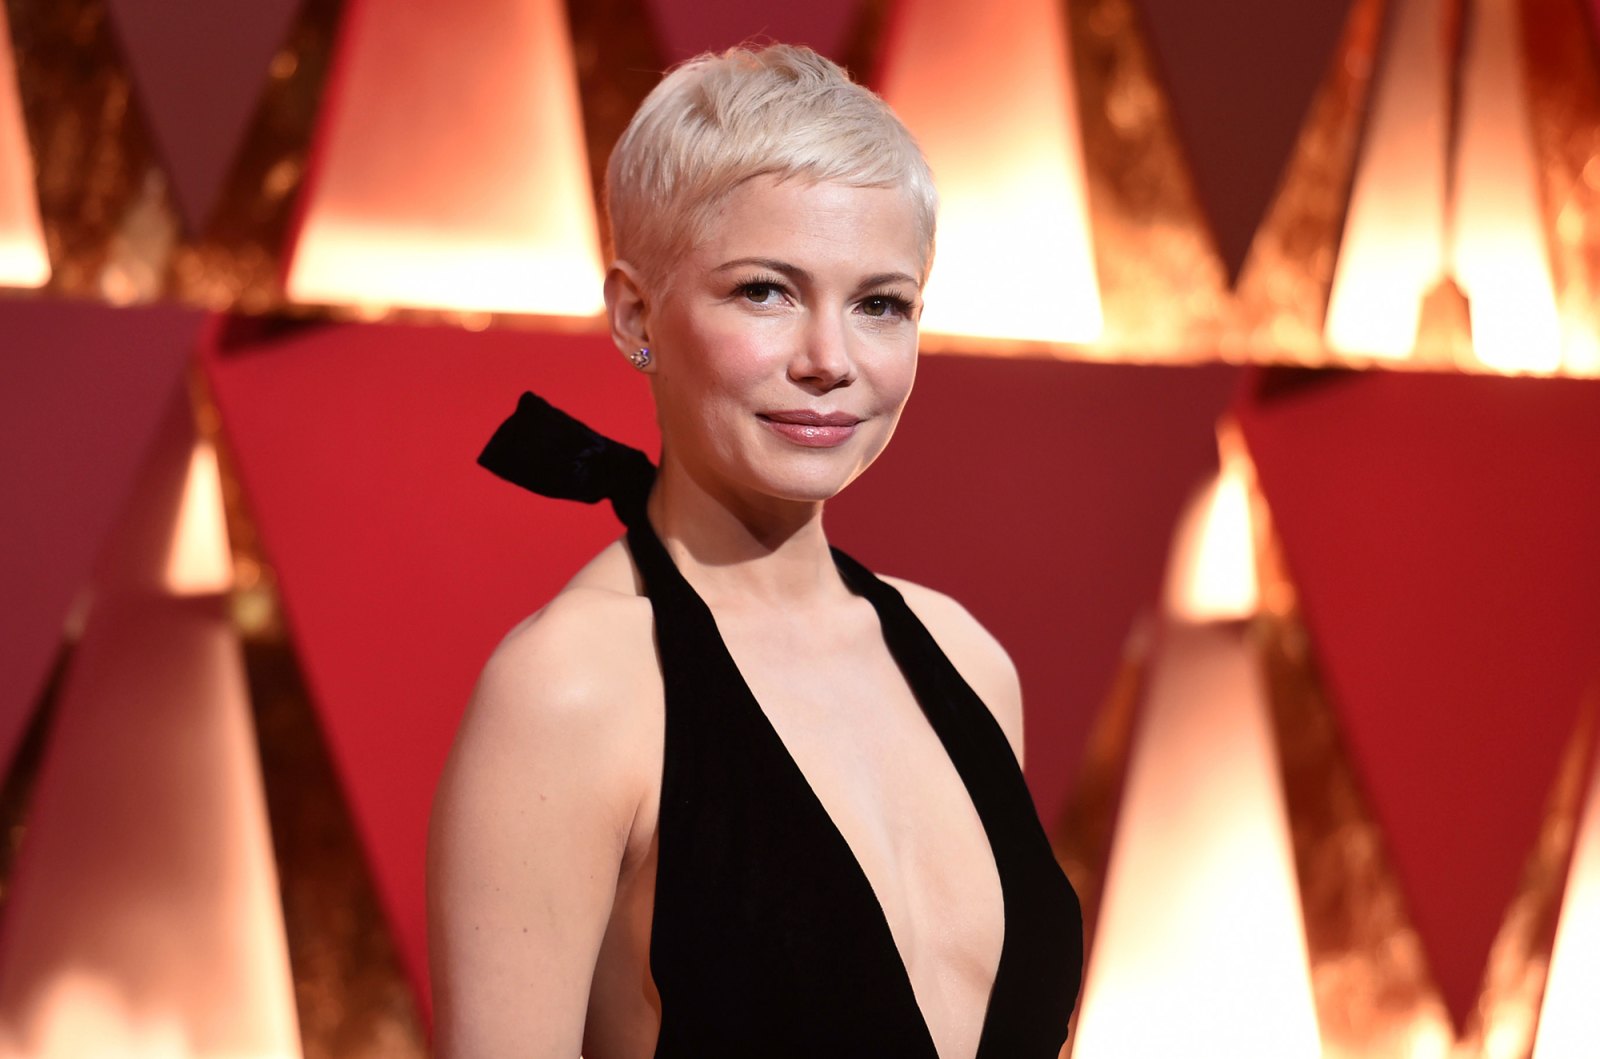 Pregnant Michelle Williams’ Best Parenting Quotes Ahead of Baby No. 2